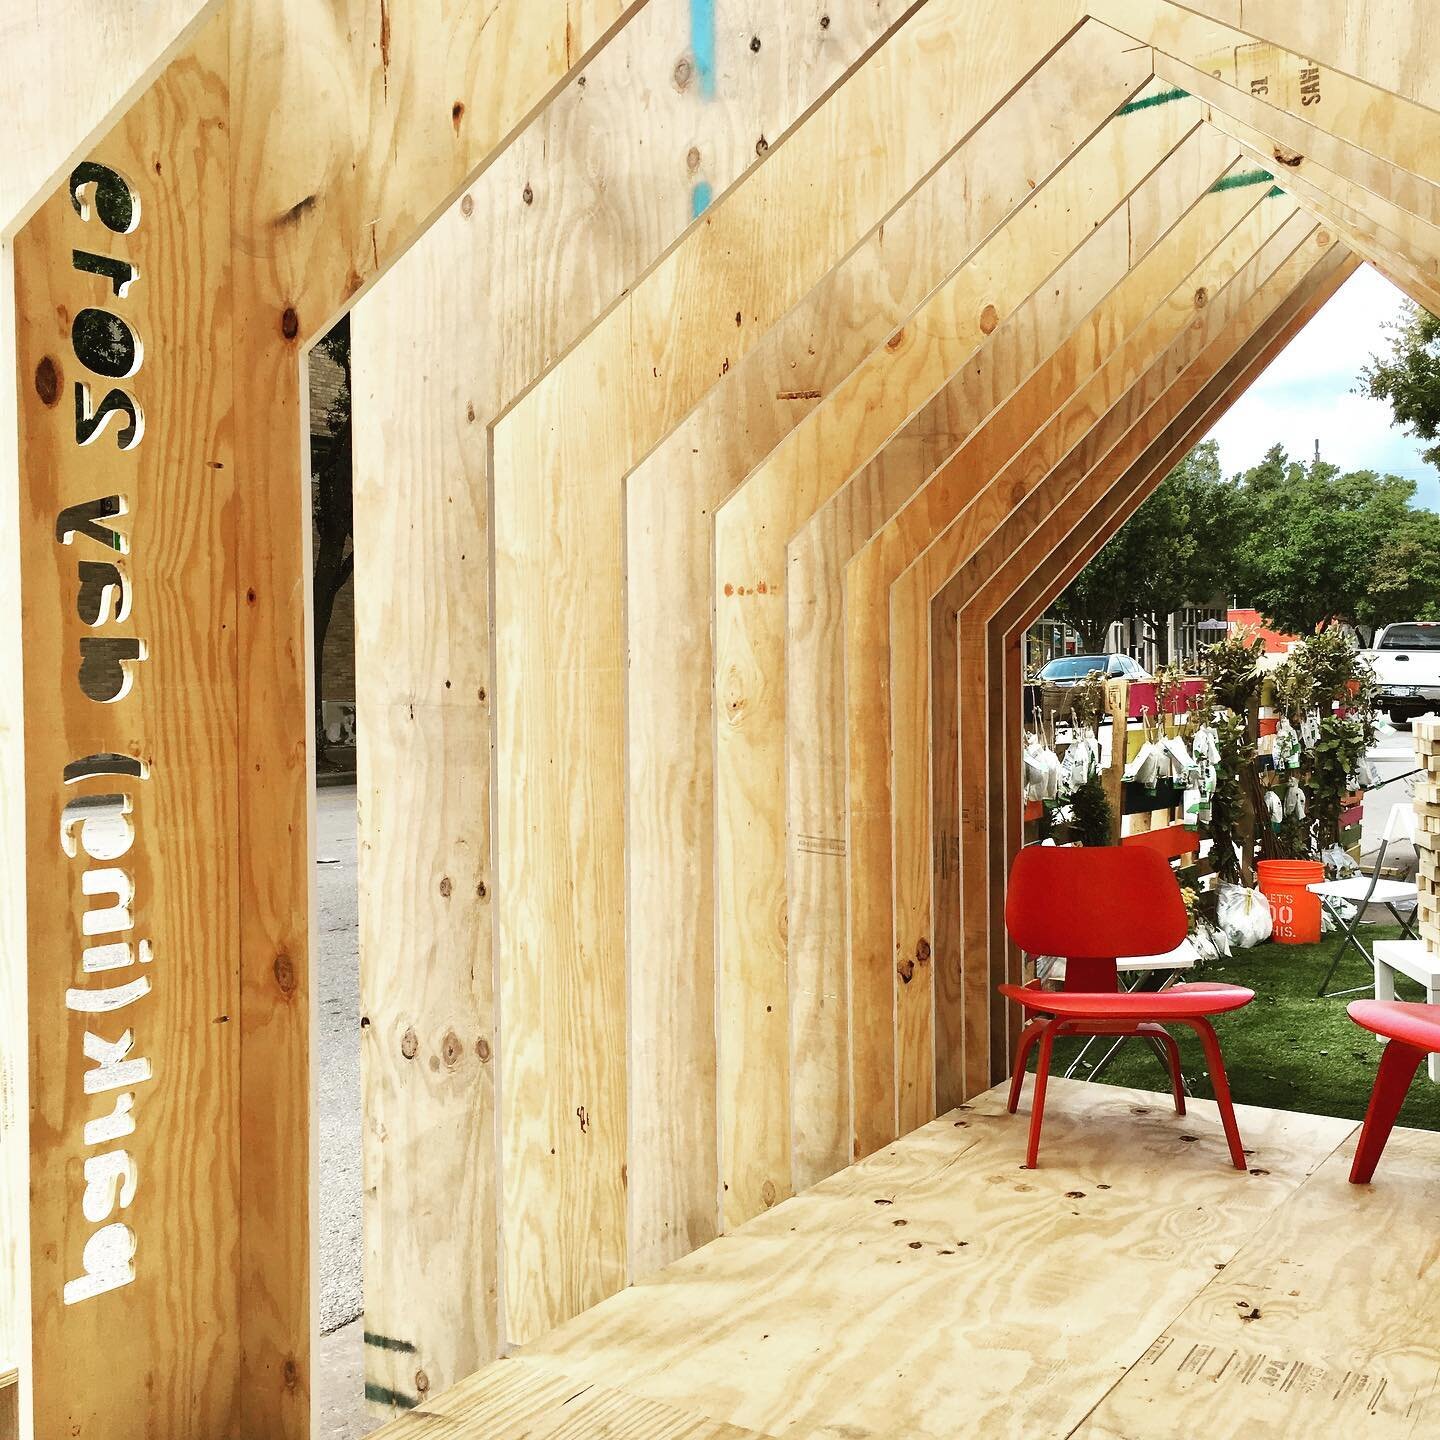 Collaboration between architecture, construction and prefabrication. #parkingdayftw @beckgroup